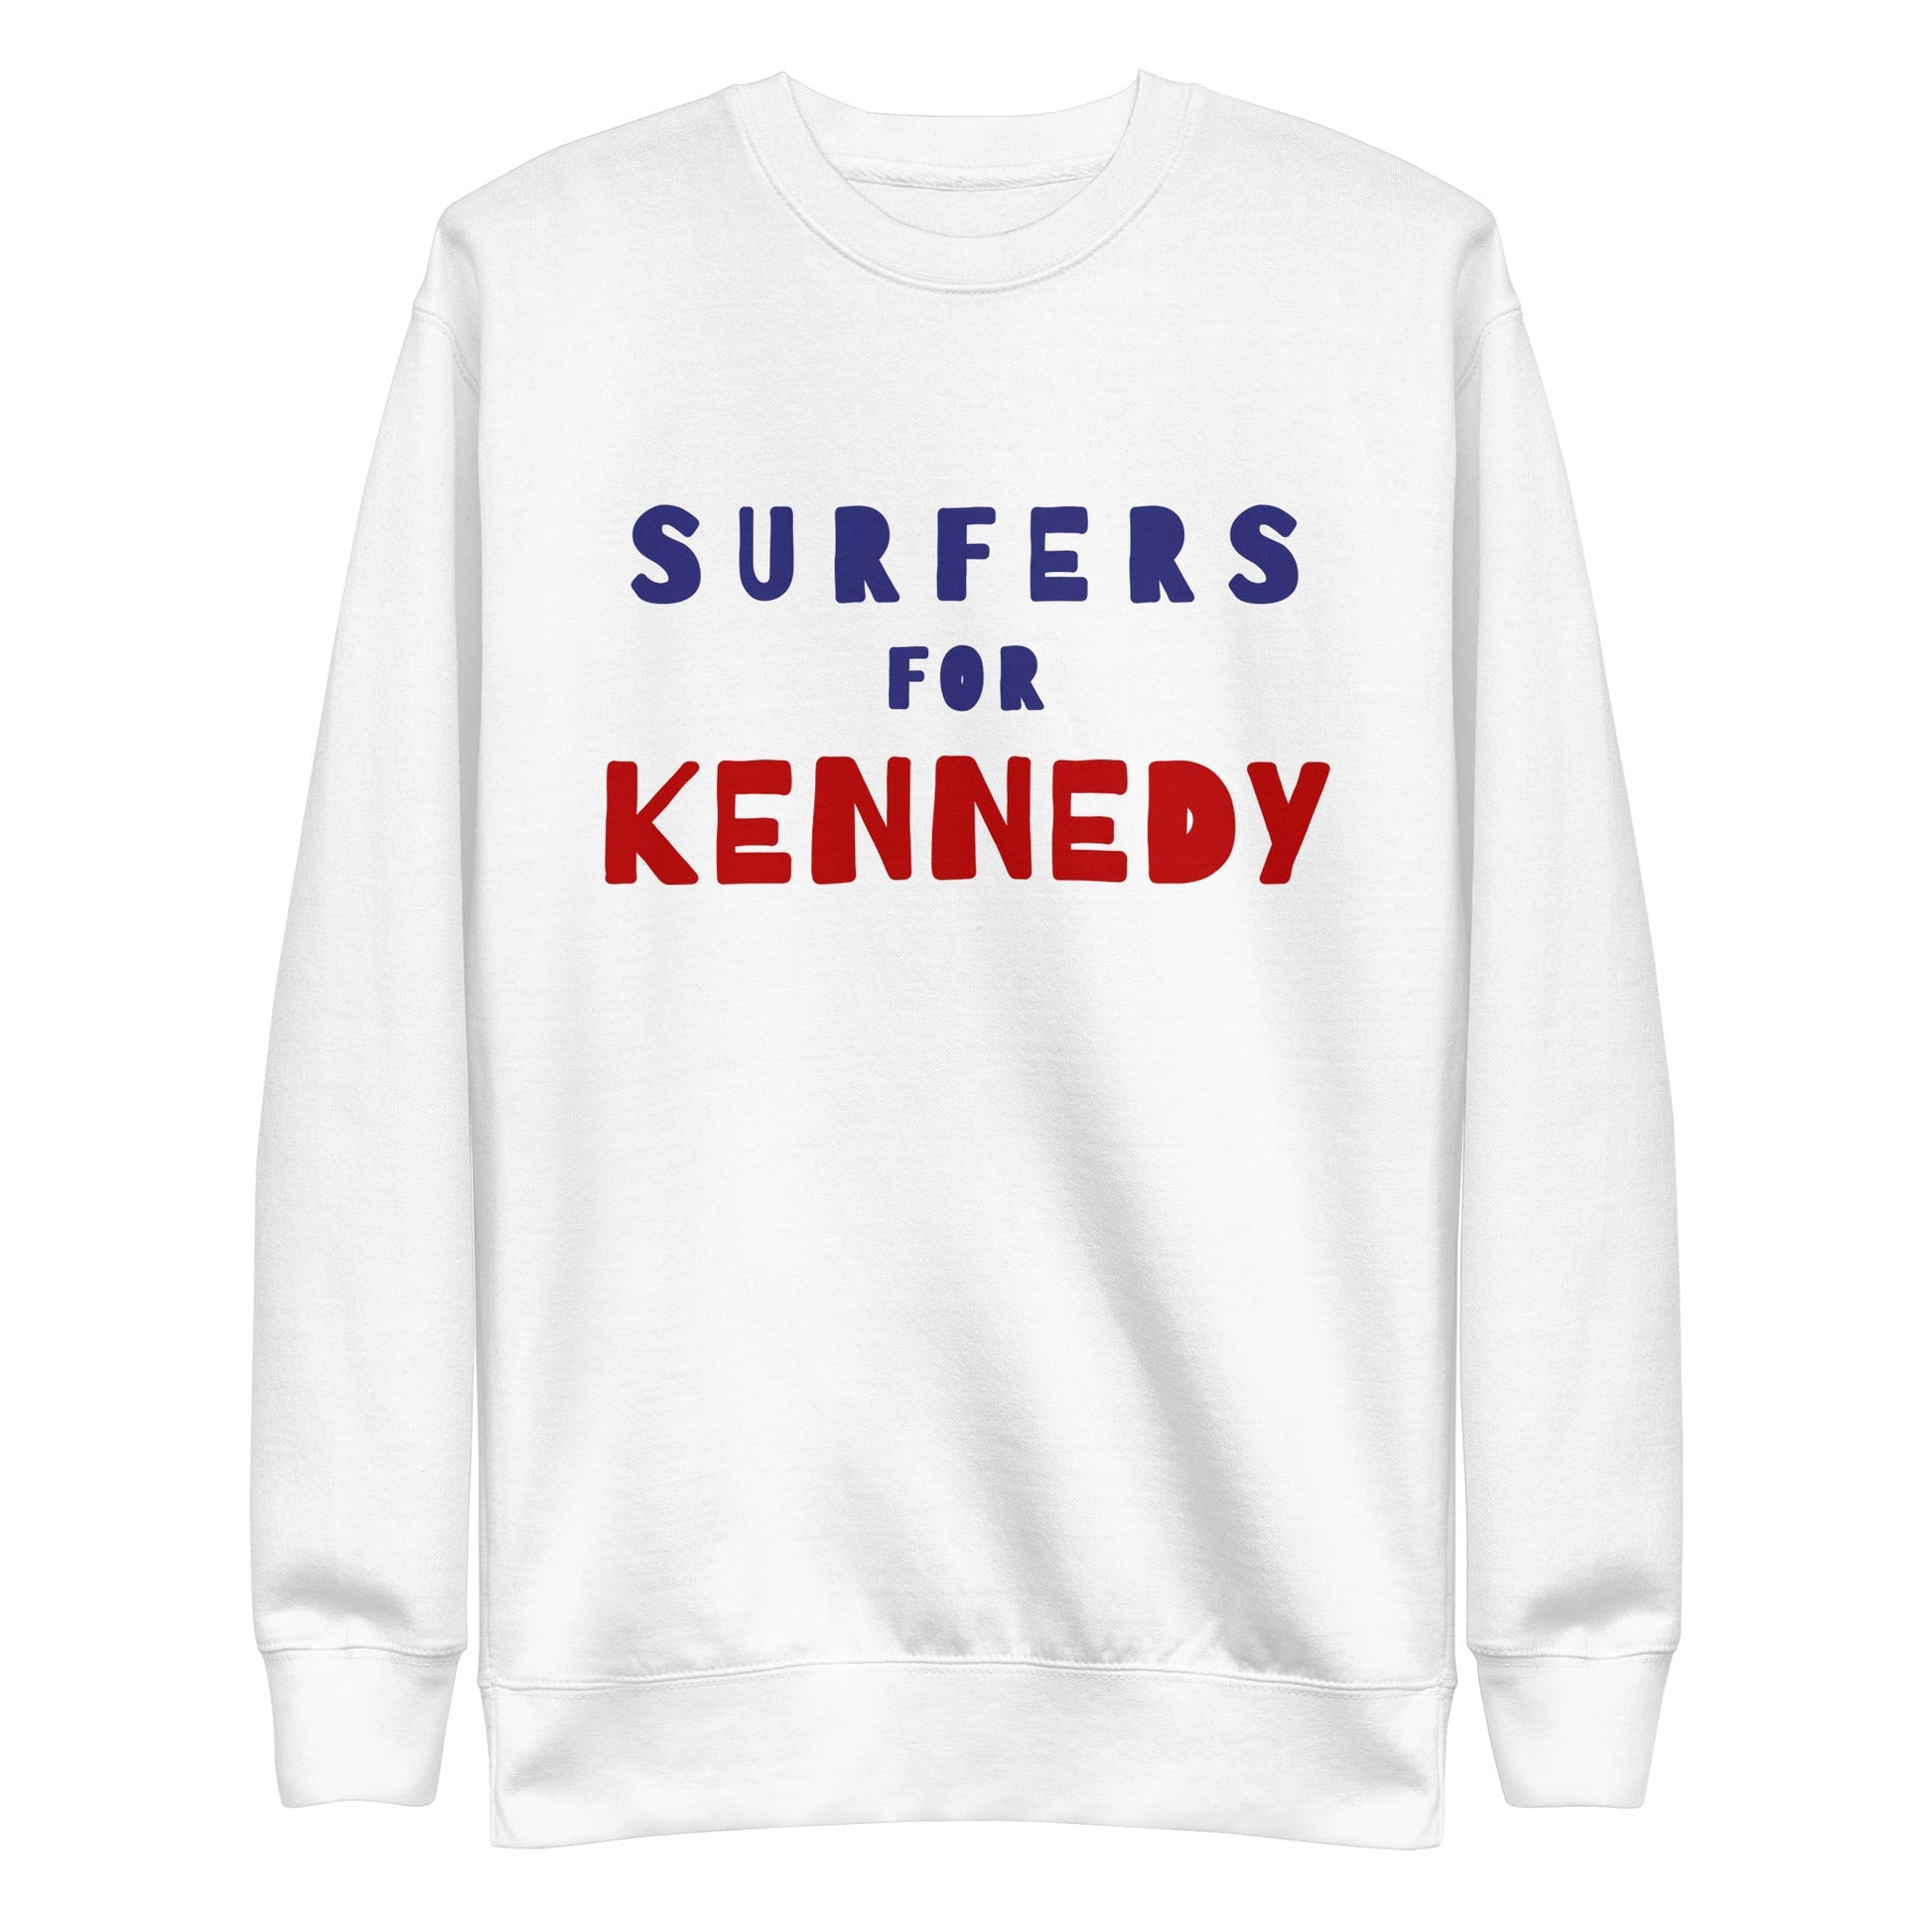 Surfers for Kennedy Unisex Premium Sweatshirt - TEAM KENNEDY. All rights reserved